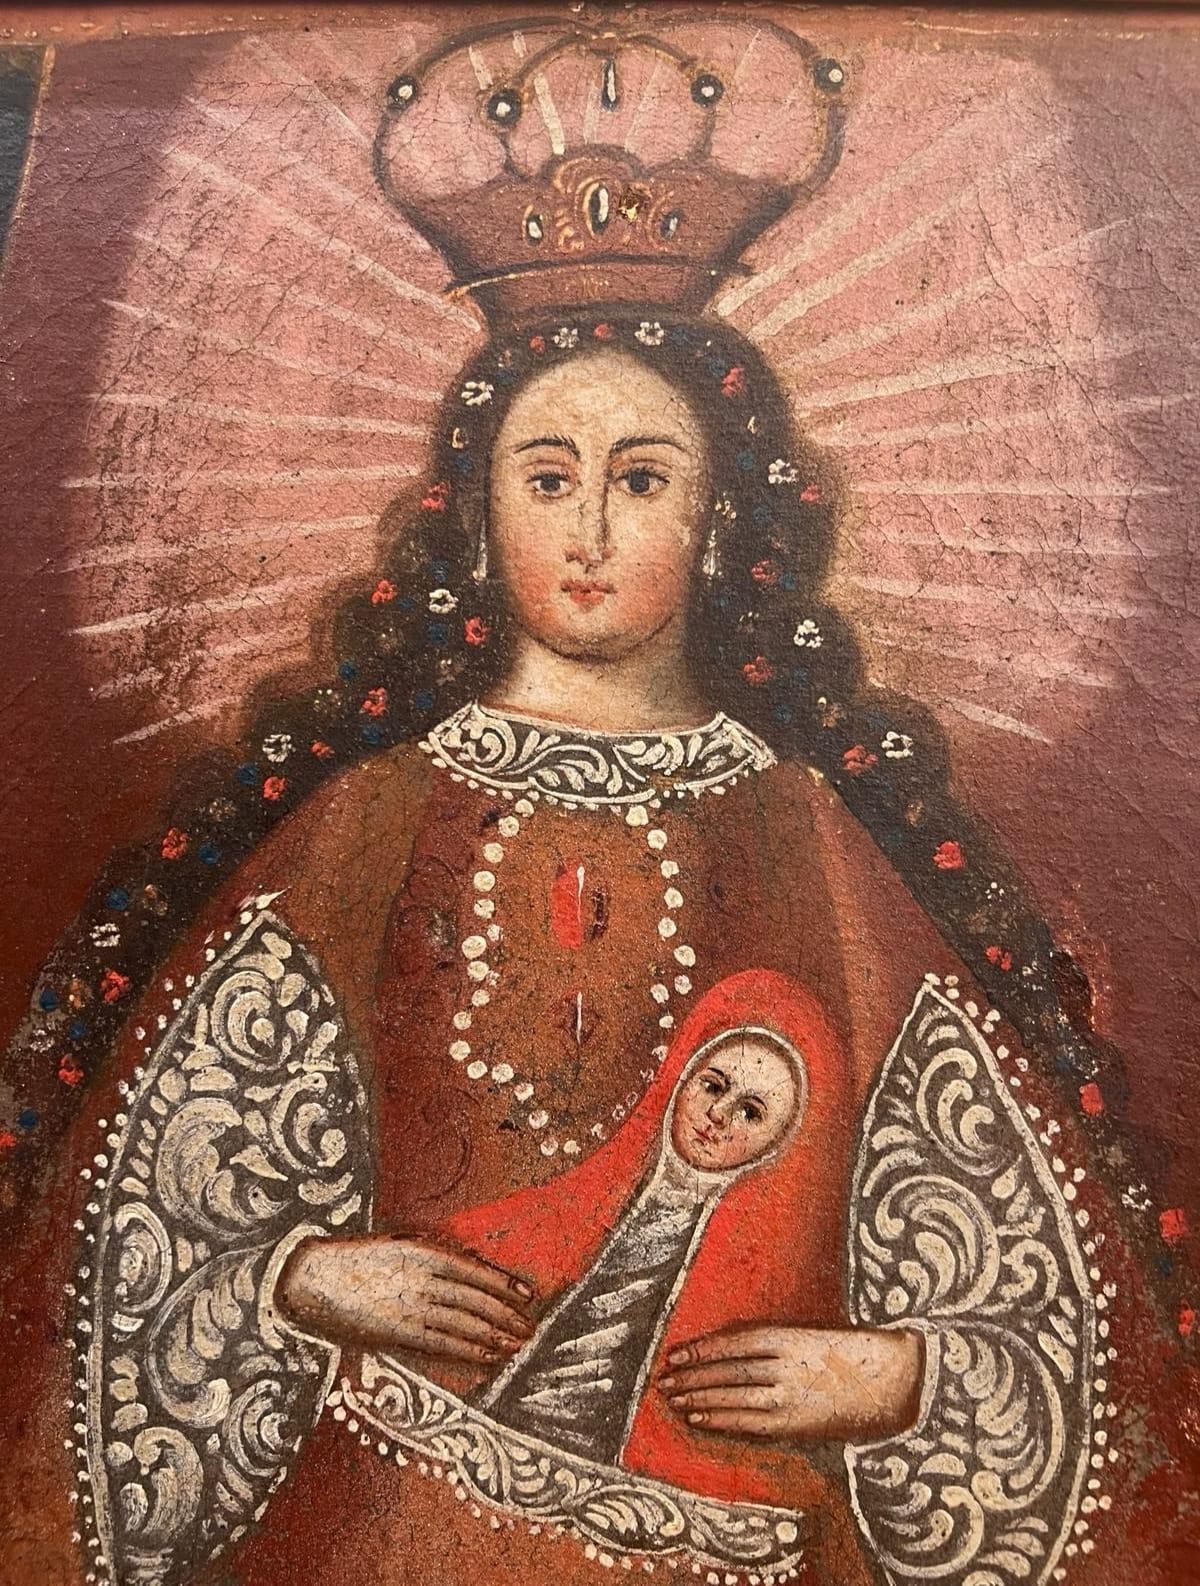 We present you with this oil-on-canvas painting from the end of 18th century representing the Virgin Mary holding little baby Jesus in her arms. 

The painting follows the style of the Cuzco School (Escuela cuzqueña) - a Roman Catholic artistic